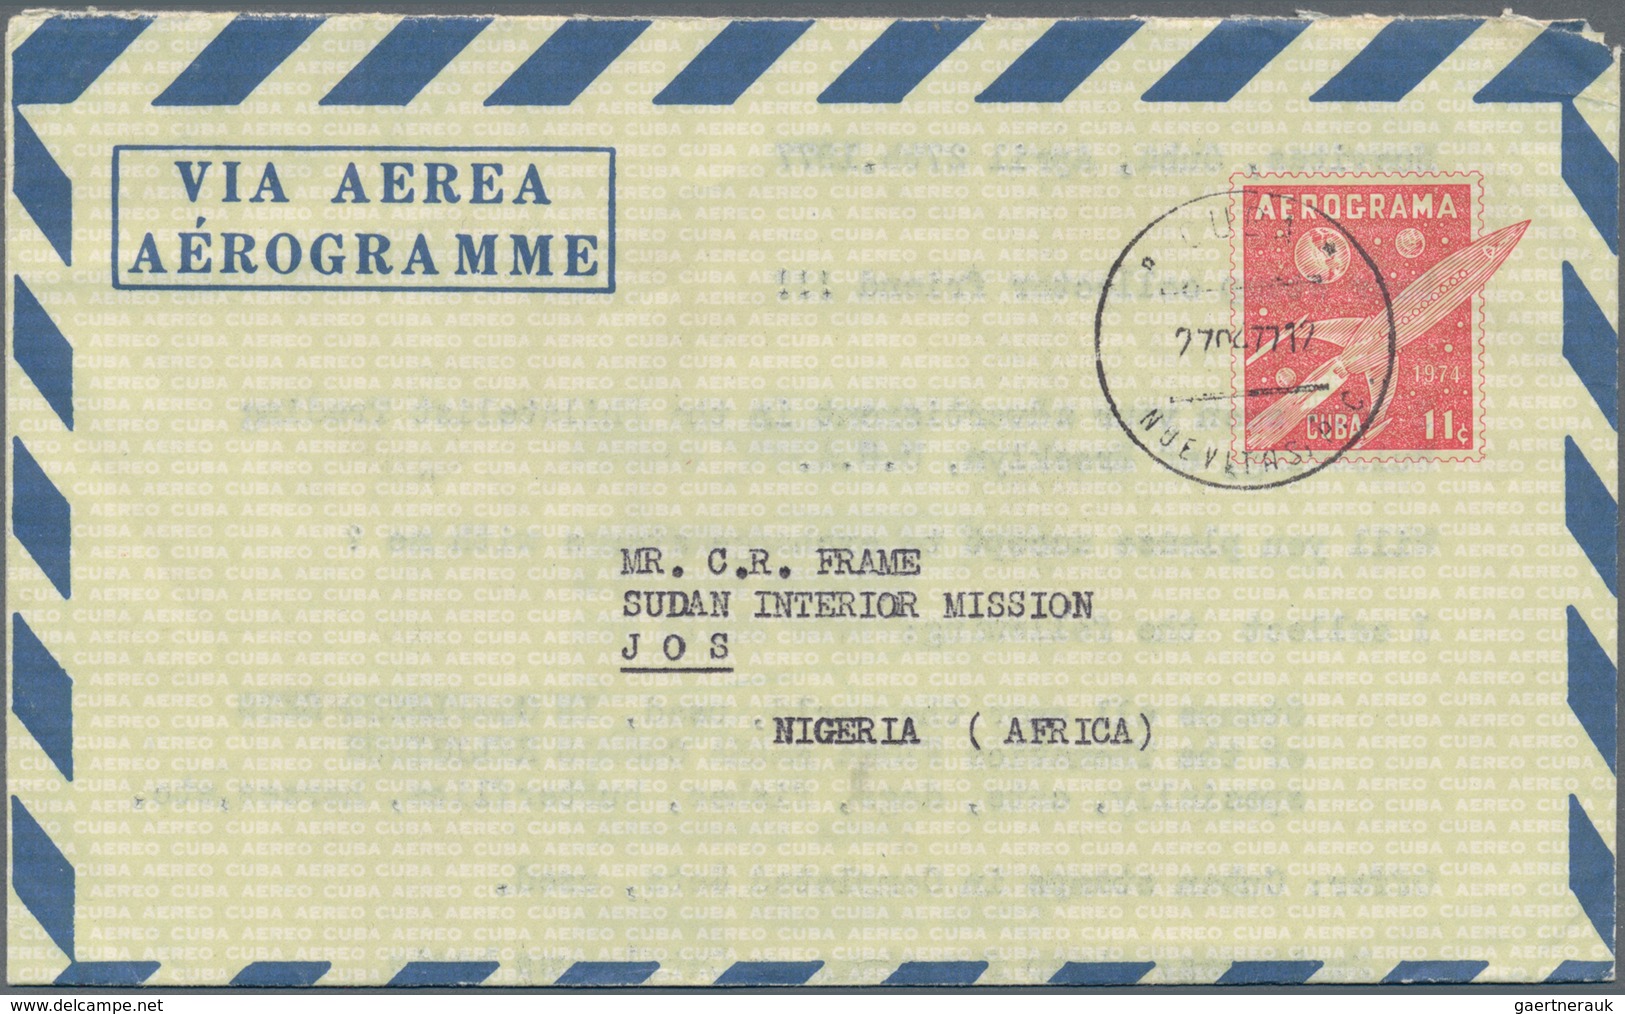 Cuba: 1899/1980 ca. 130 unused/CTO-used and used postal stationery postcards, picture postcards, env